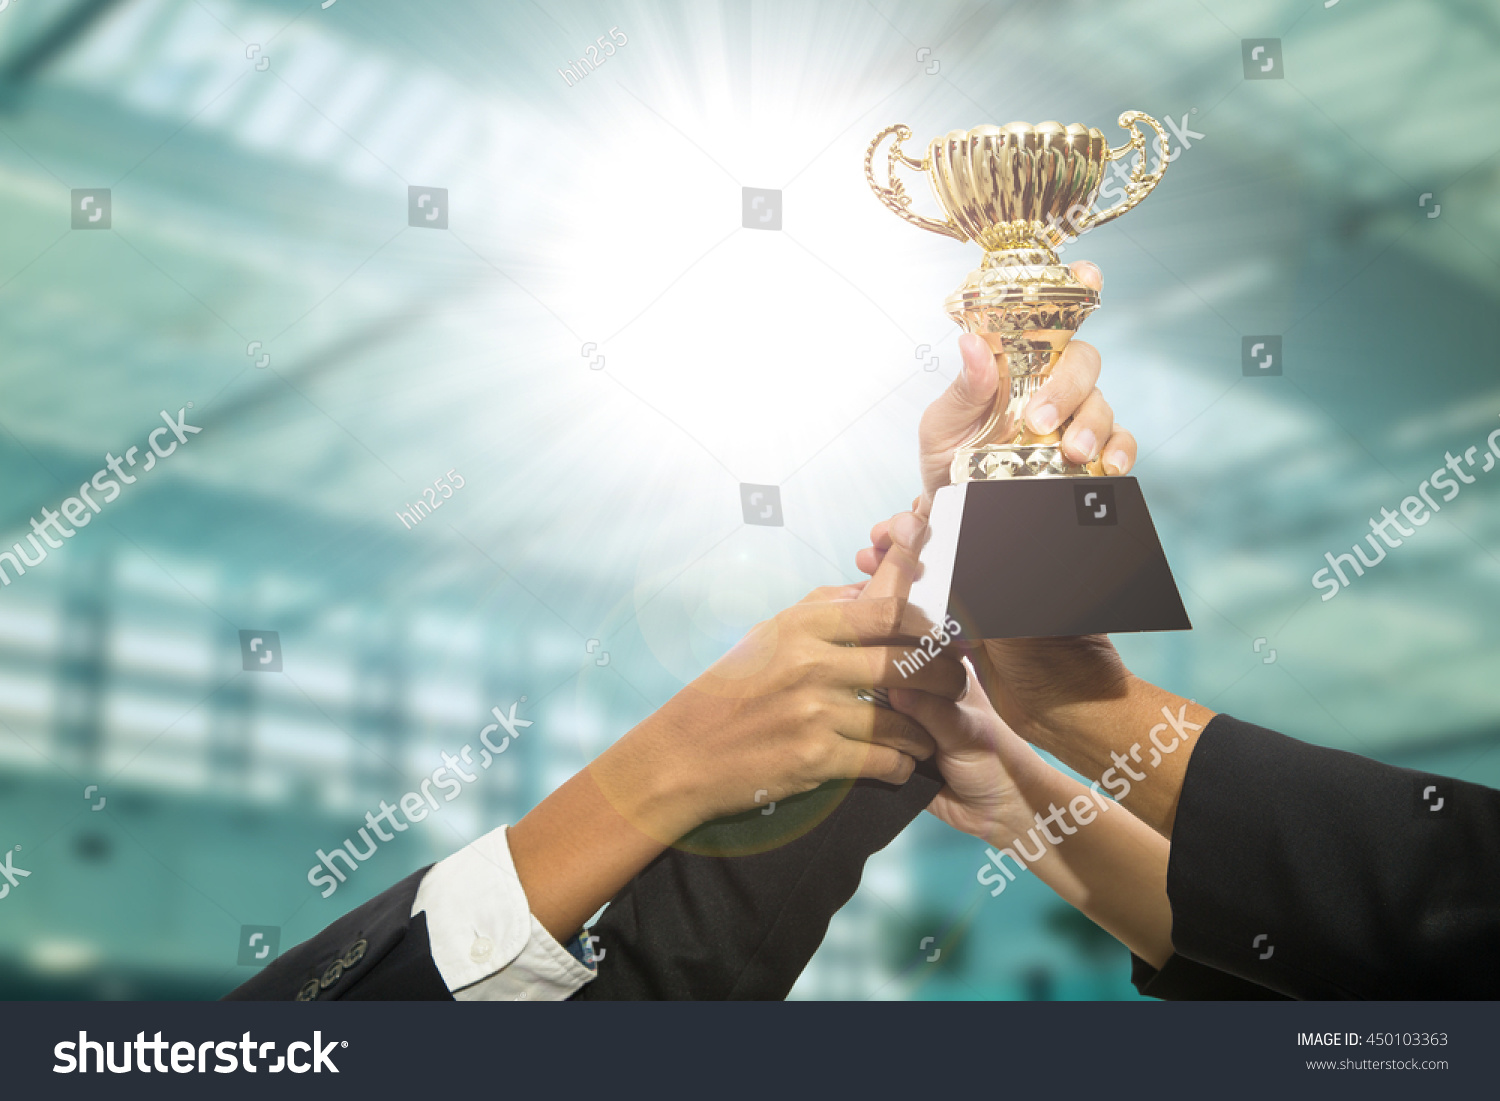 Businessman team holding award trophy for show their victory. #450103363